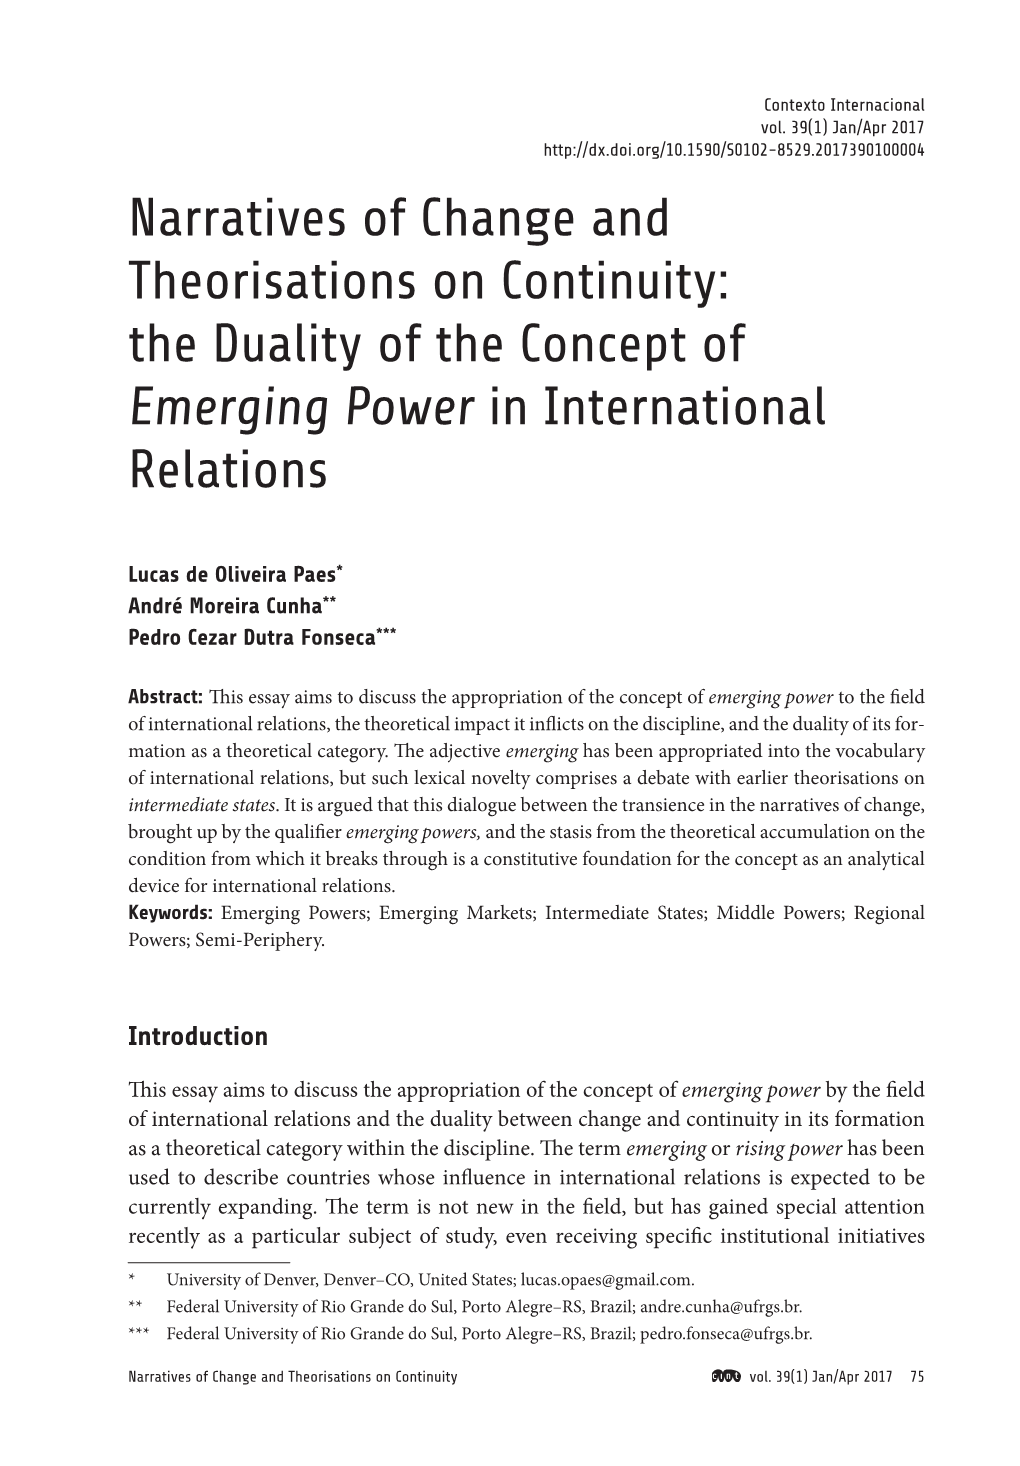 The Duality of the Concept of Emerging Power in International Relations